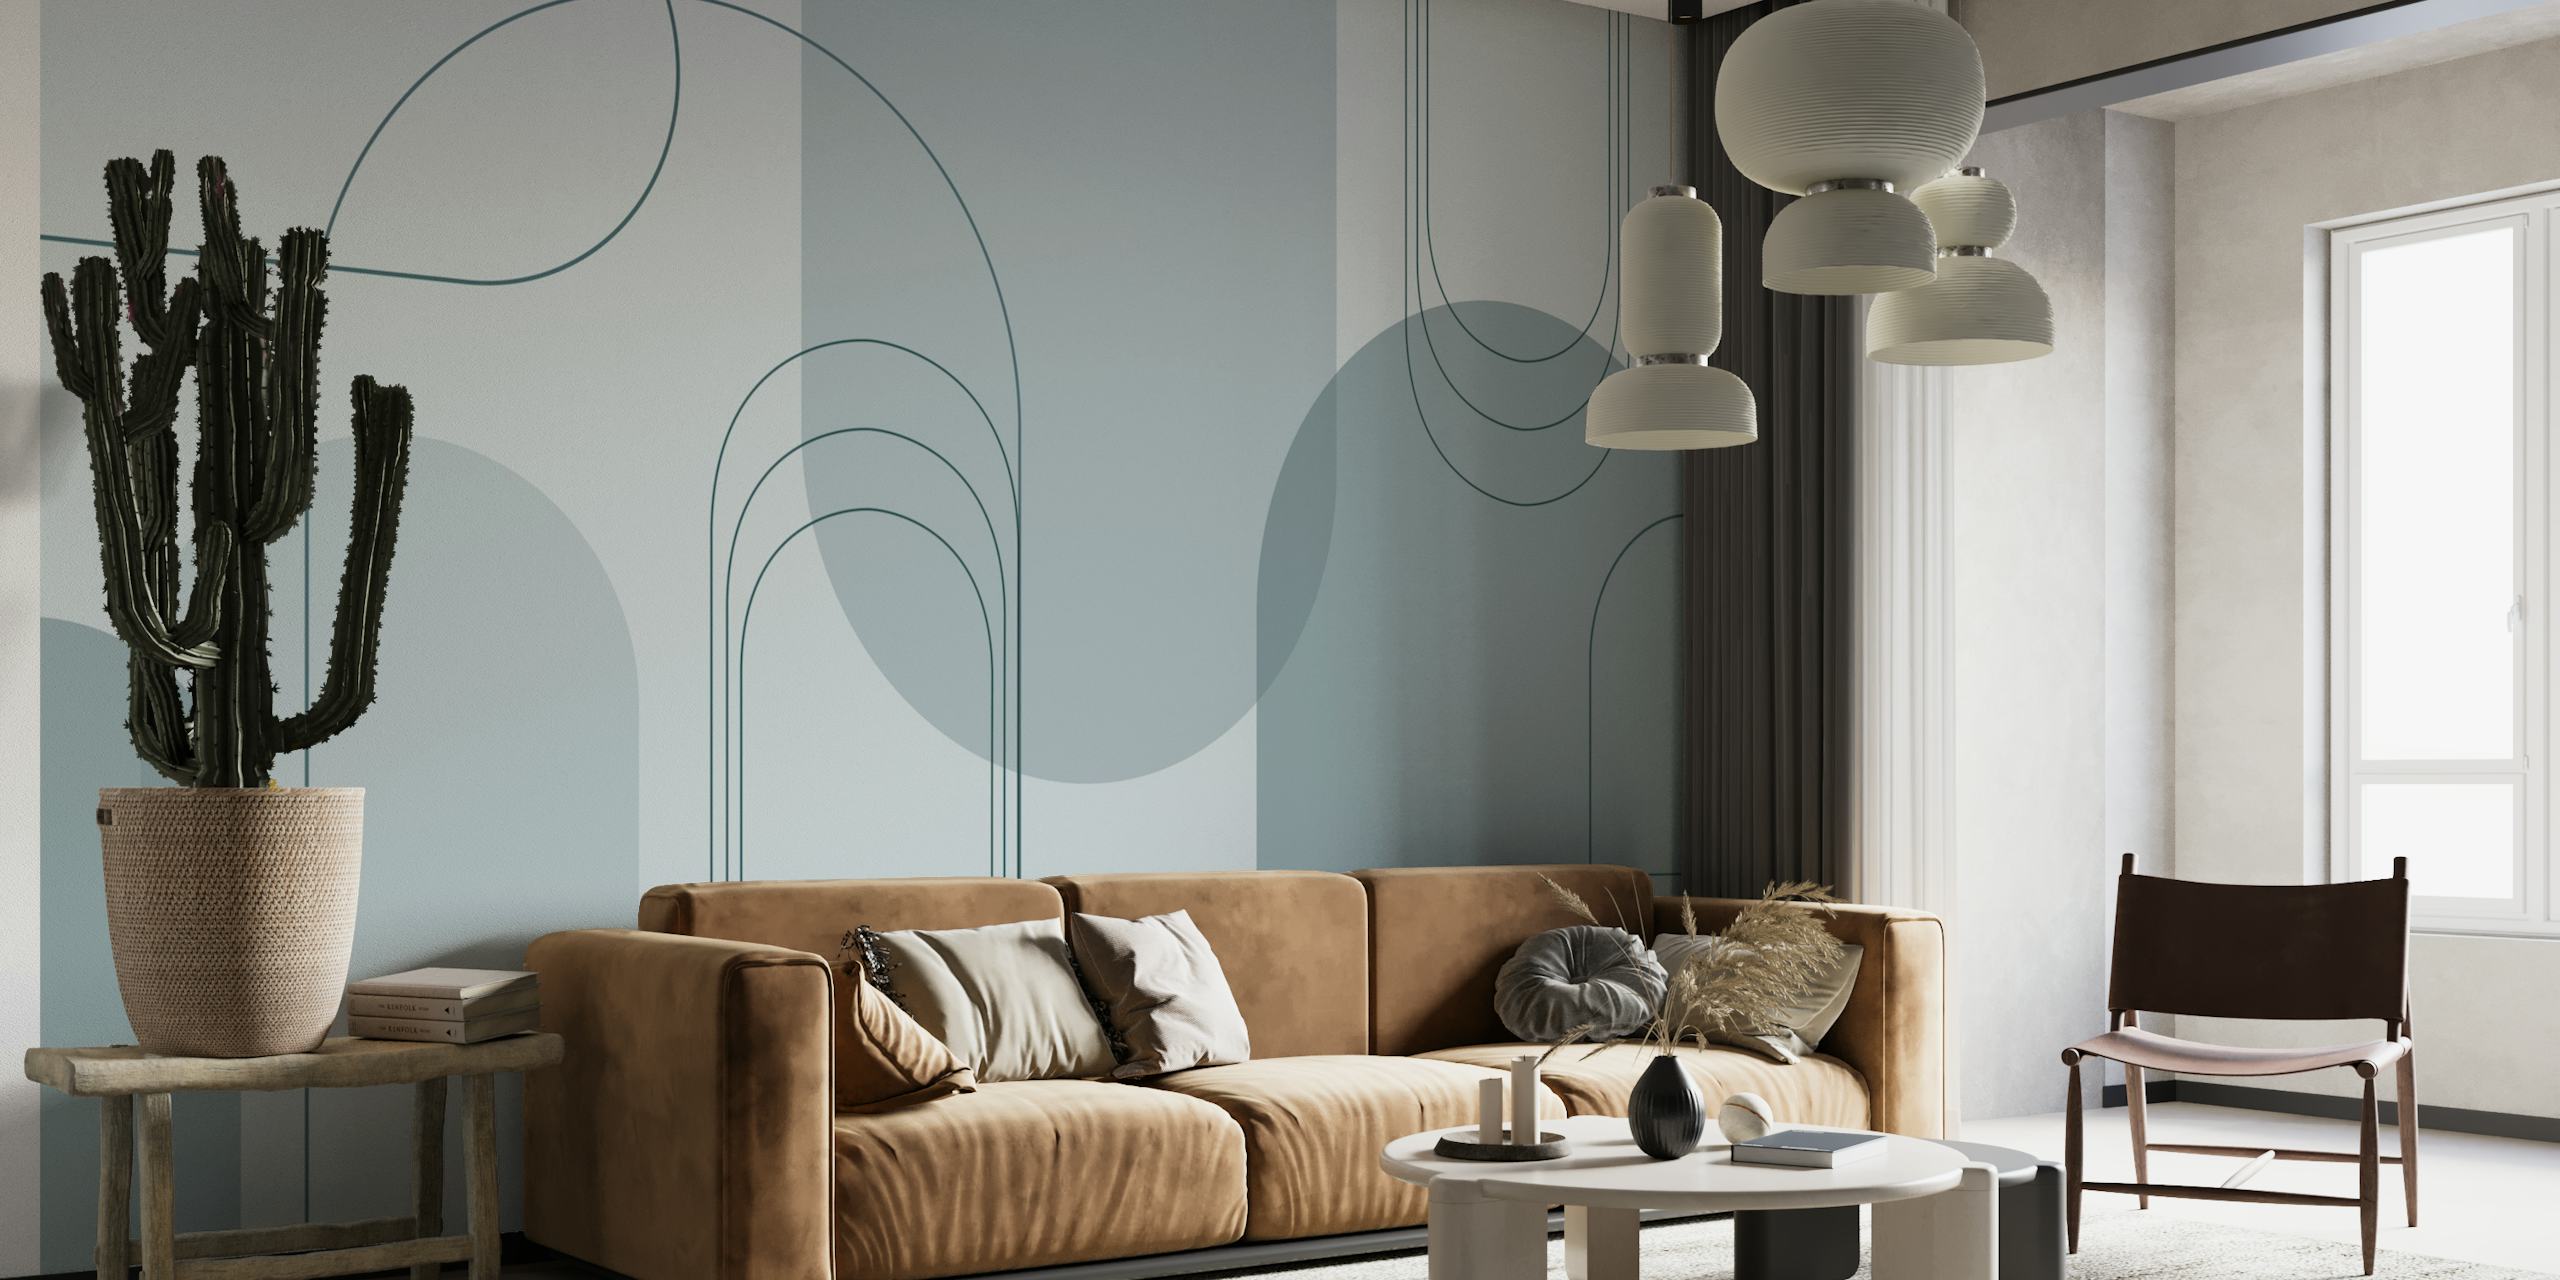 Minimalist Arches wall mural in blue grey tones with overlapping semi-circular patterns.